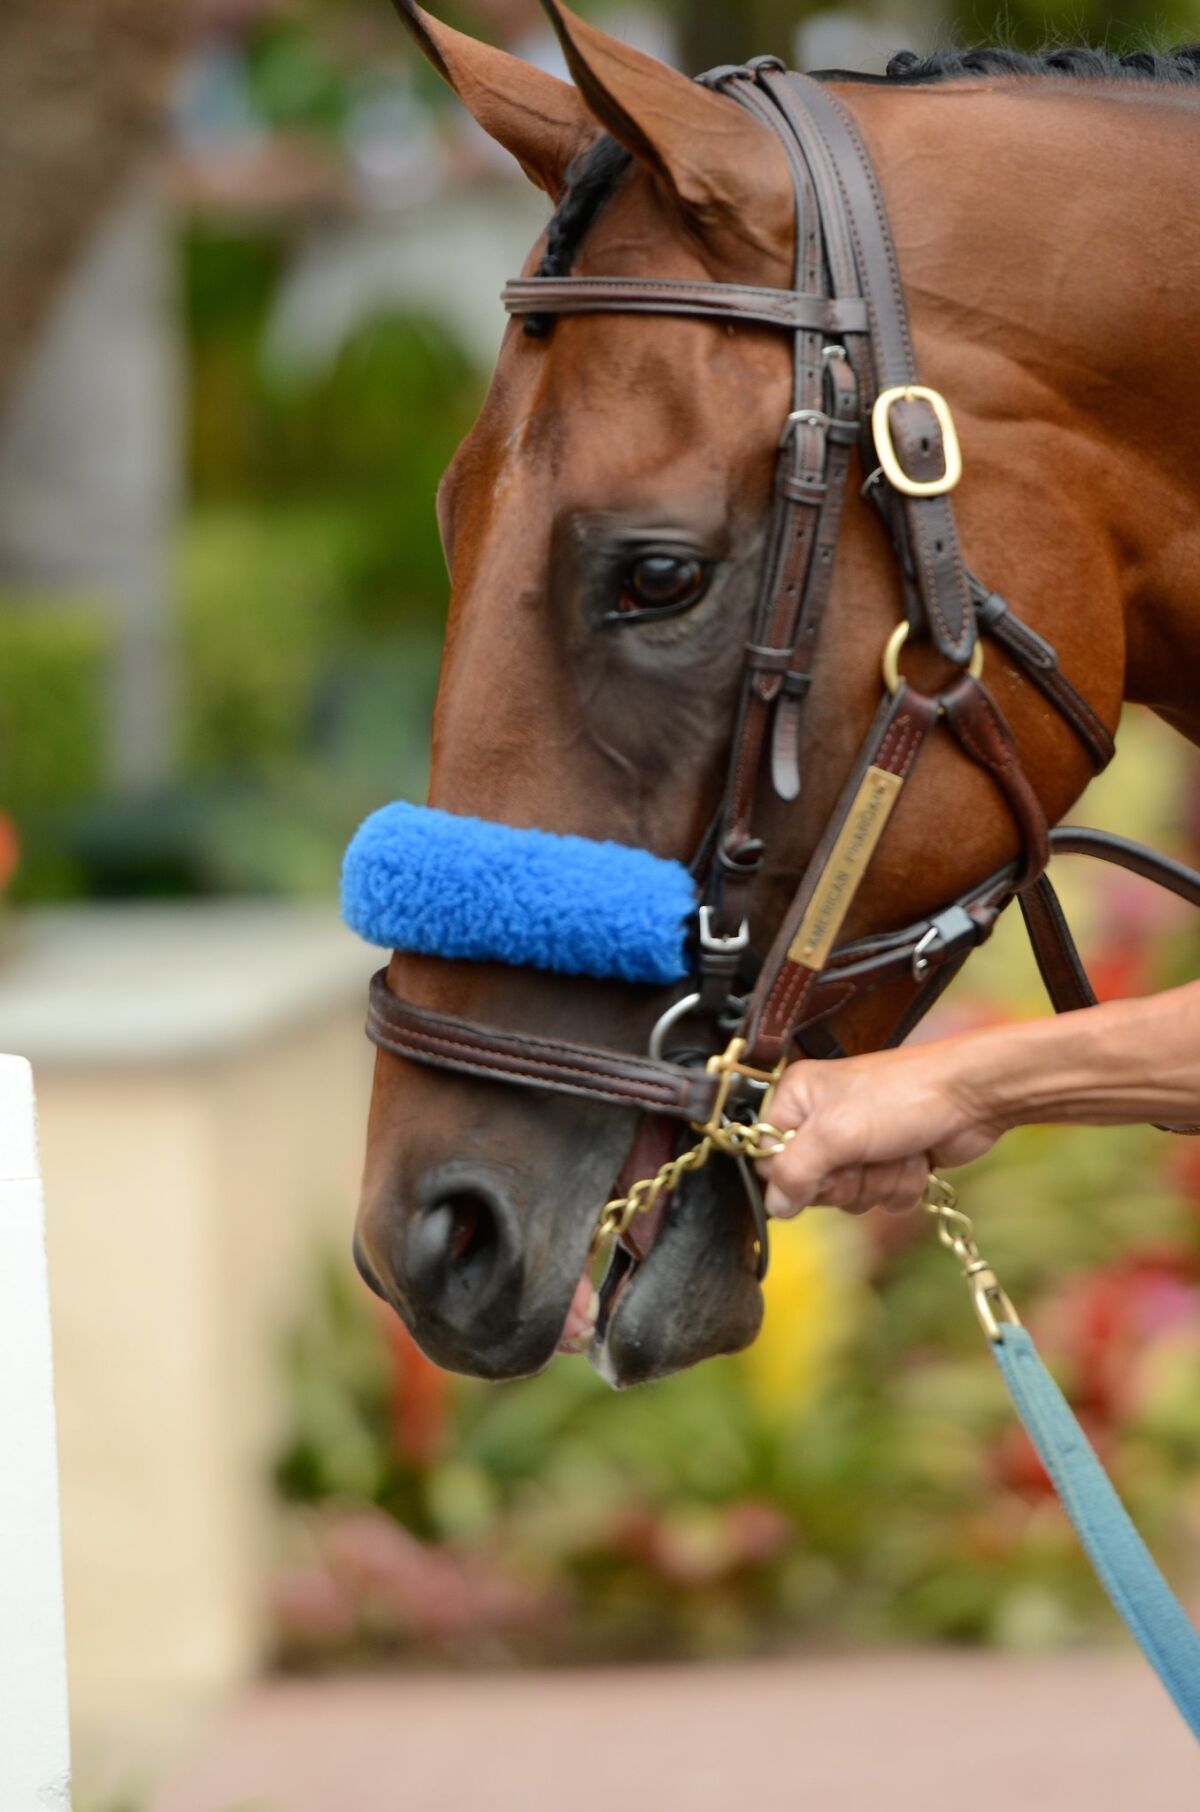 Triple Crown winner American Pharoah made his debut at Del Mar last summer, and he will be at the track this year. Officials are hoping he will make a public appearance on TVG Pacific Classic Day, Aug. 22. Photo by Kelley Carlson